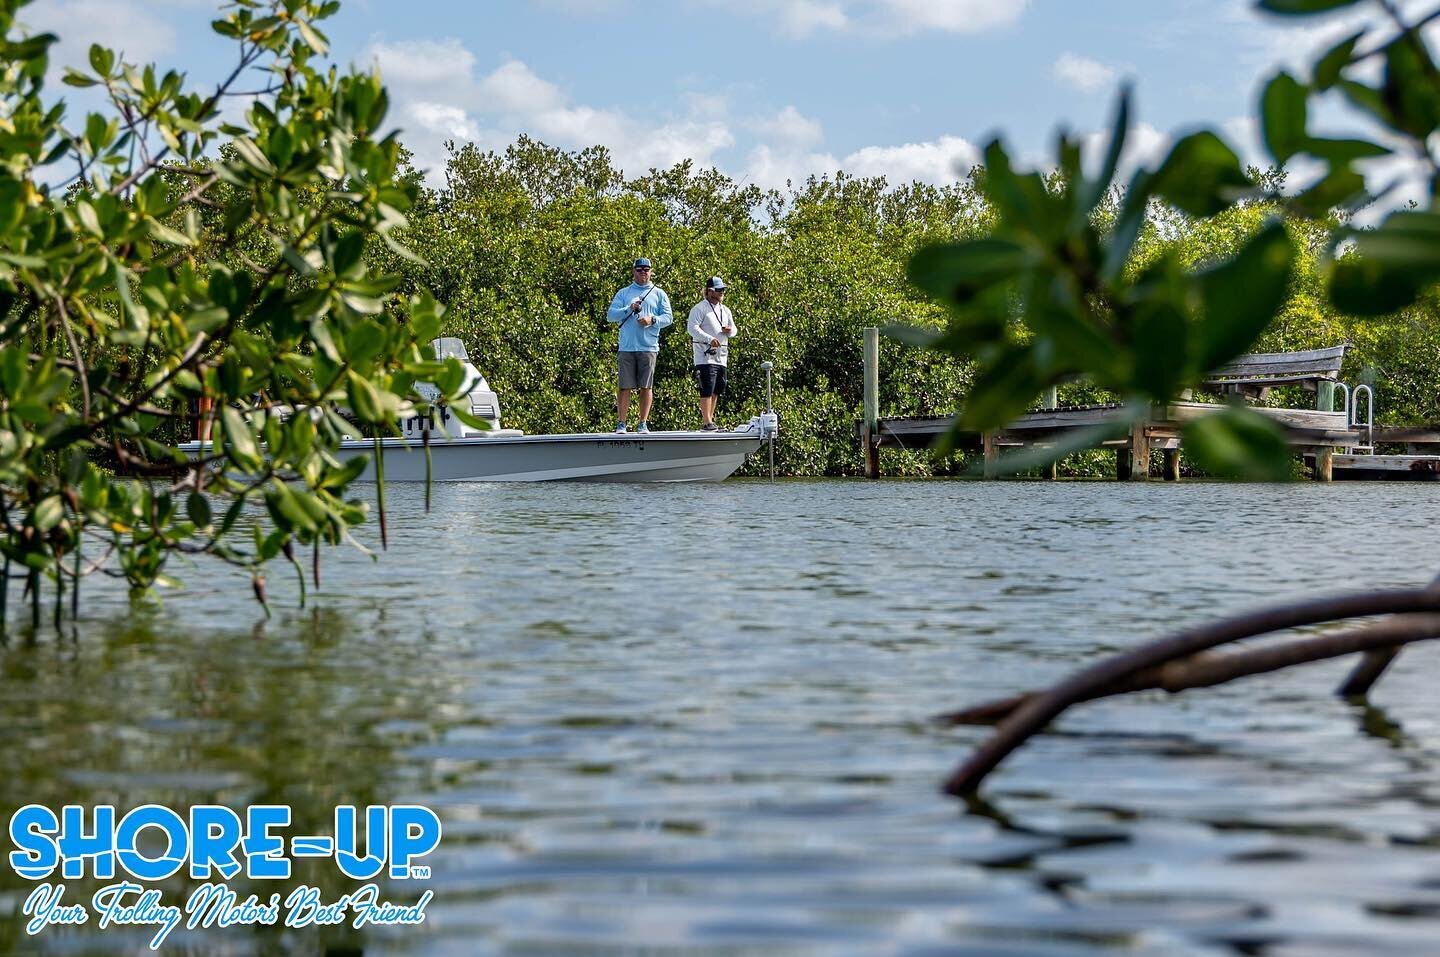 Shore-Up solves many of the problems with the current mounts on the market. Learn more at shoreupfishing.com!⠀
⠀
⠀
⠀
⠀
#shoreup #fishing #trollingmotor #shoreupsystems